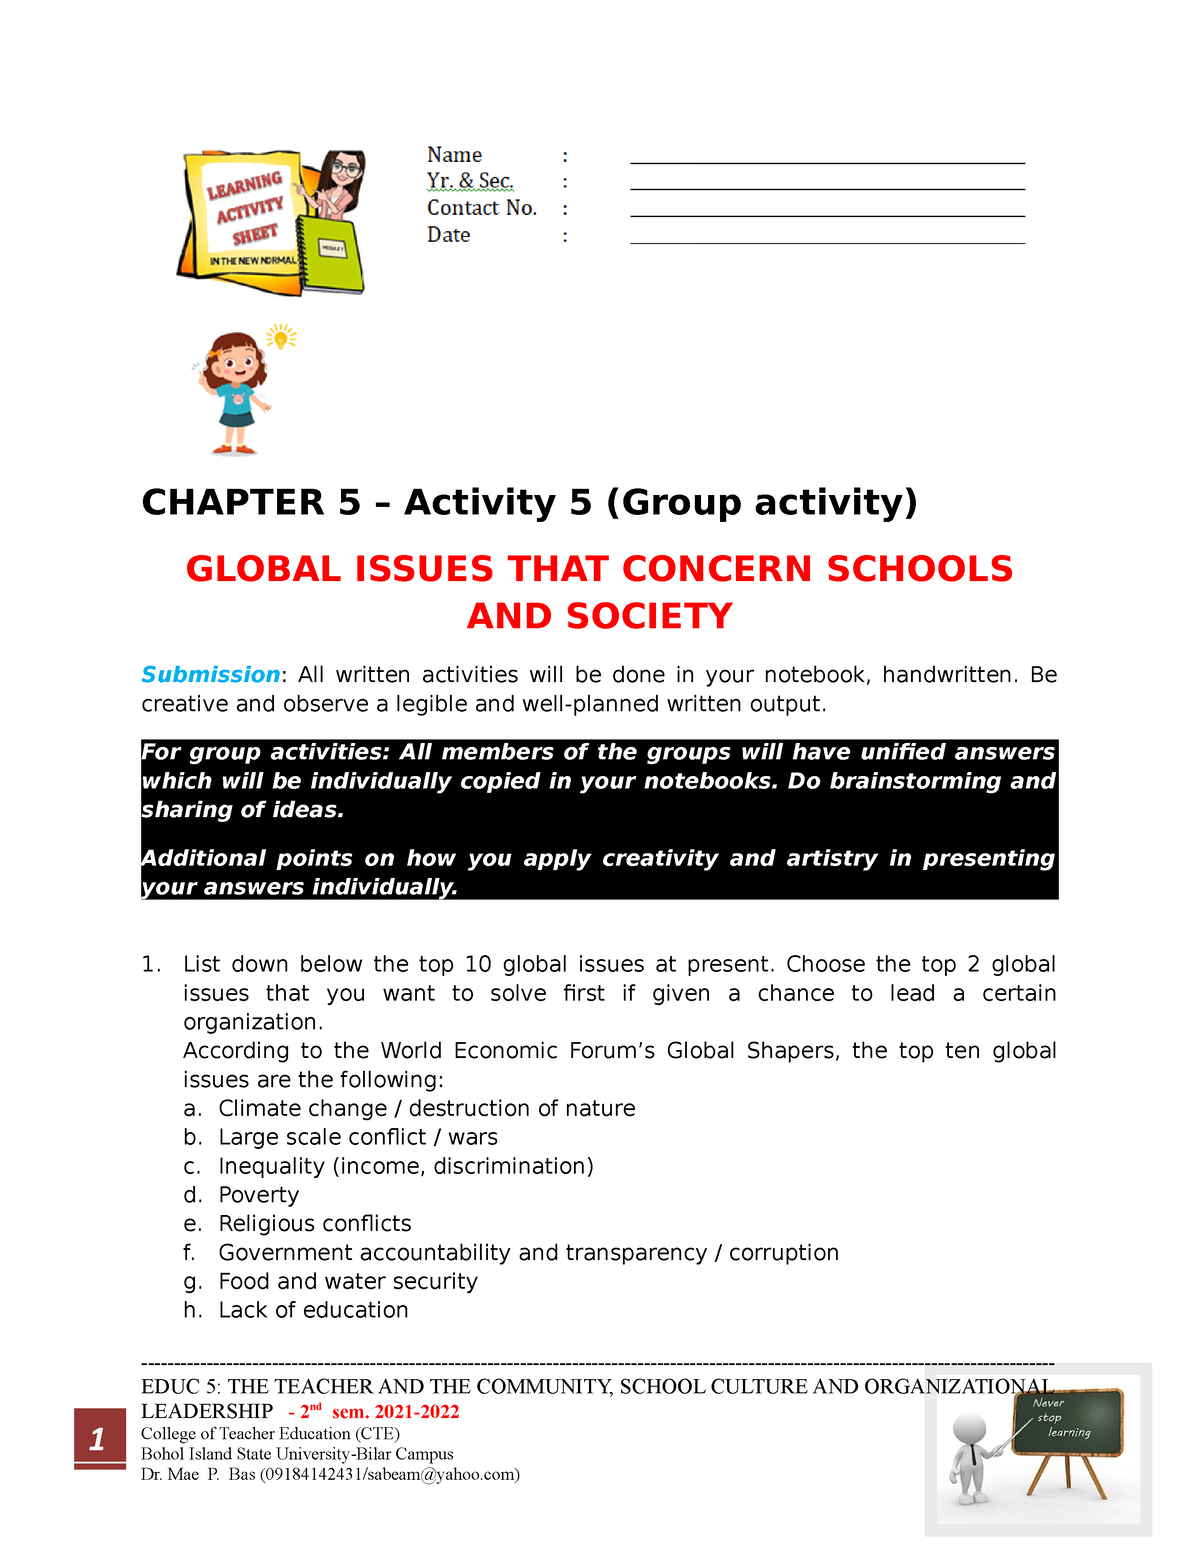 global issues that concern schools and society essay